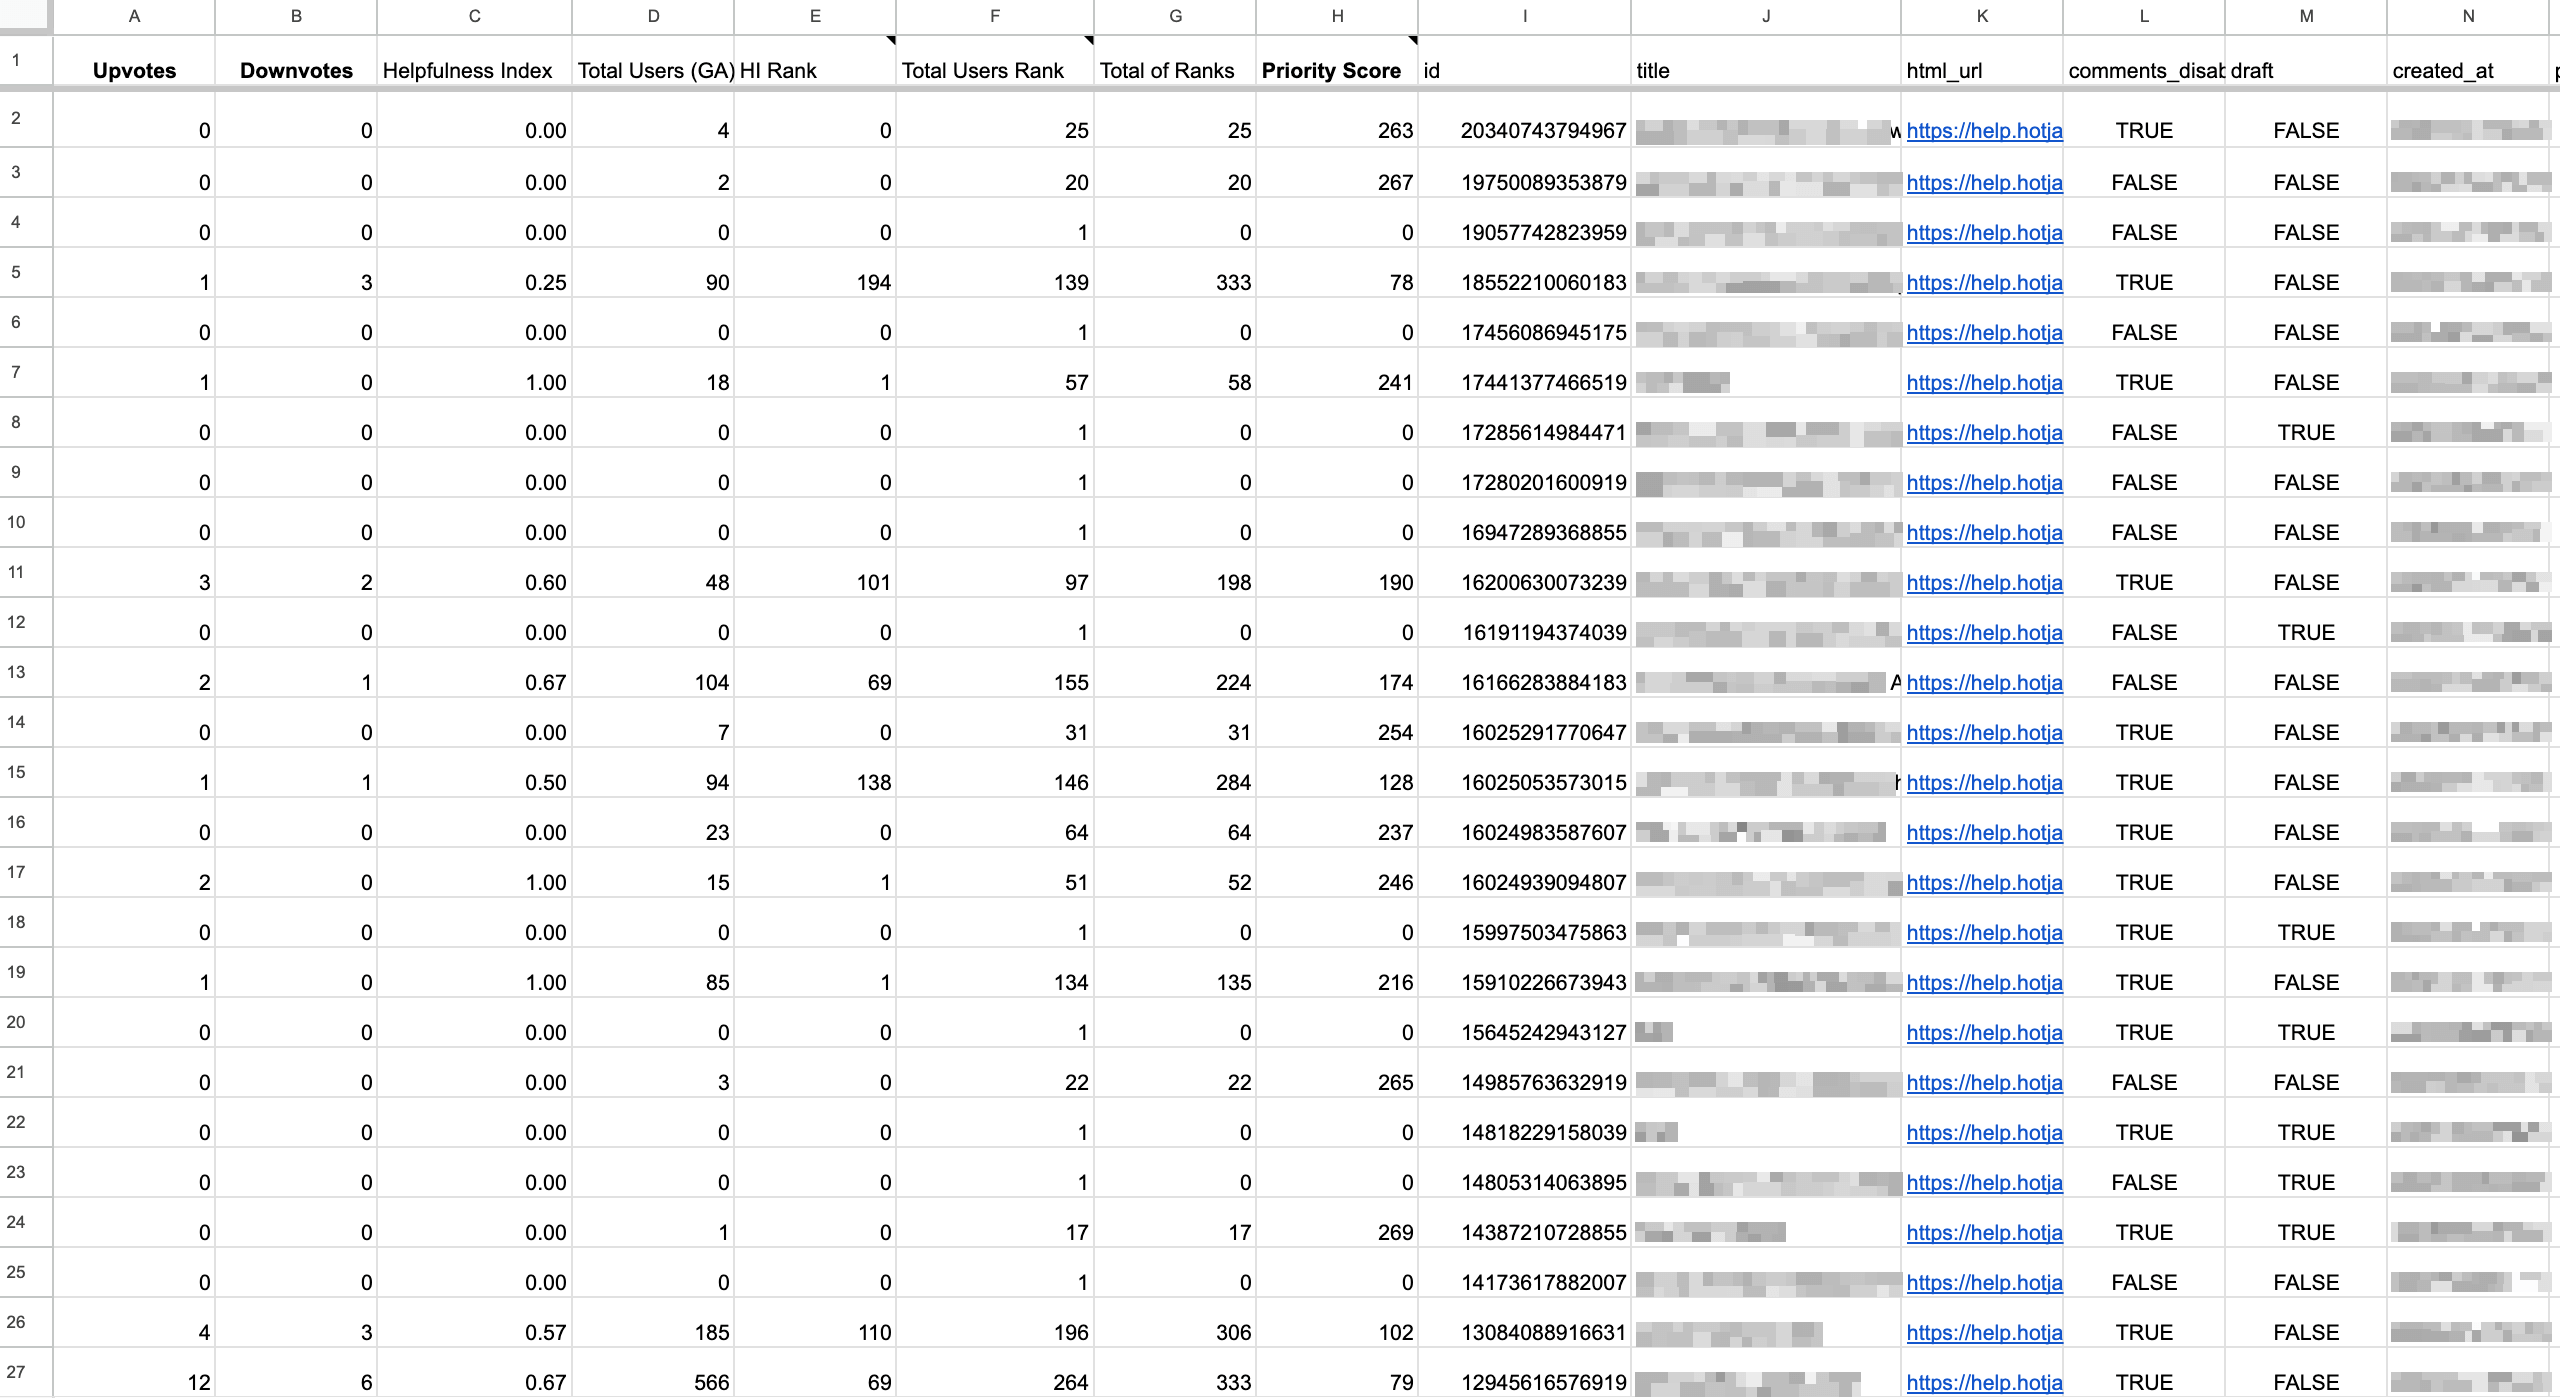 Google Sheet showing Zendesk article data imported using the Zendesk API combined with Google Analytics data  and used to determine a Helpfulness Index and Priority Score.